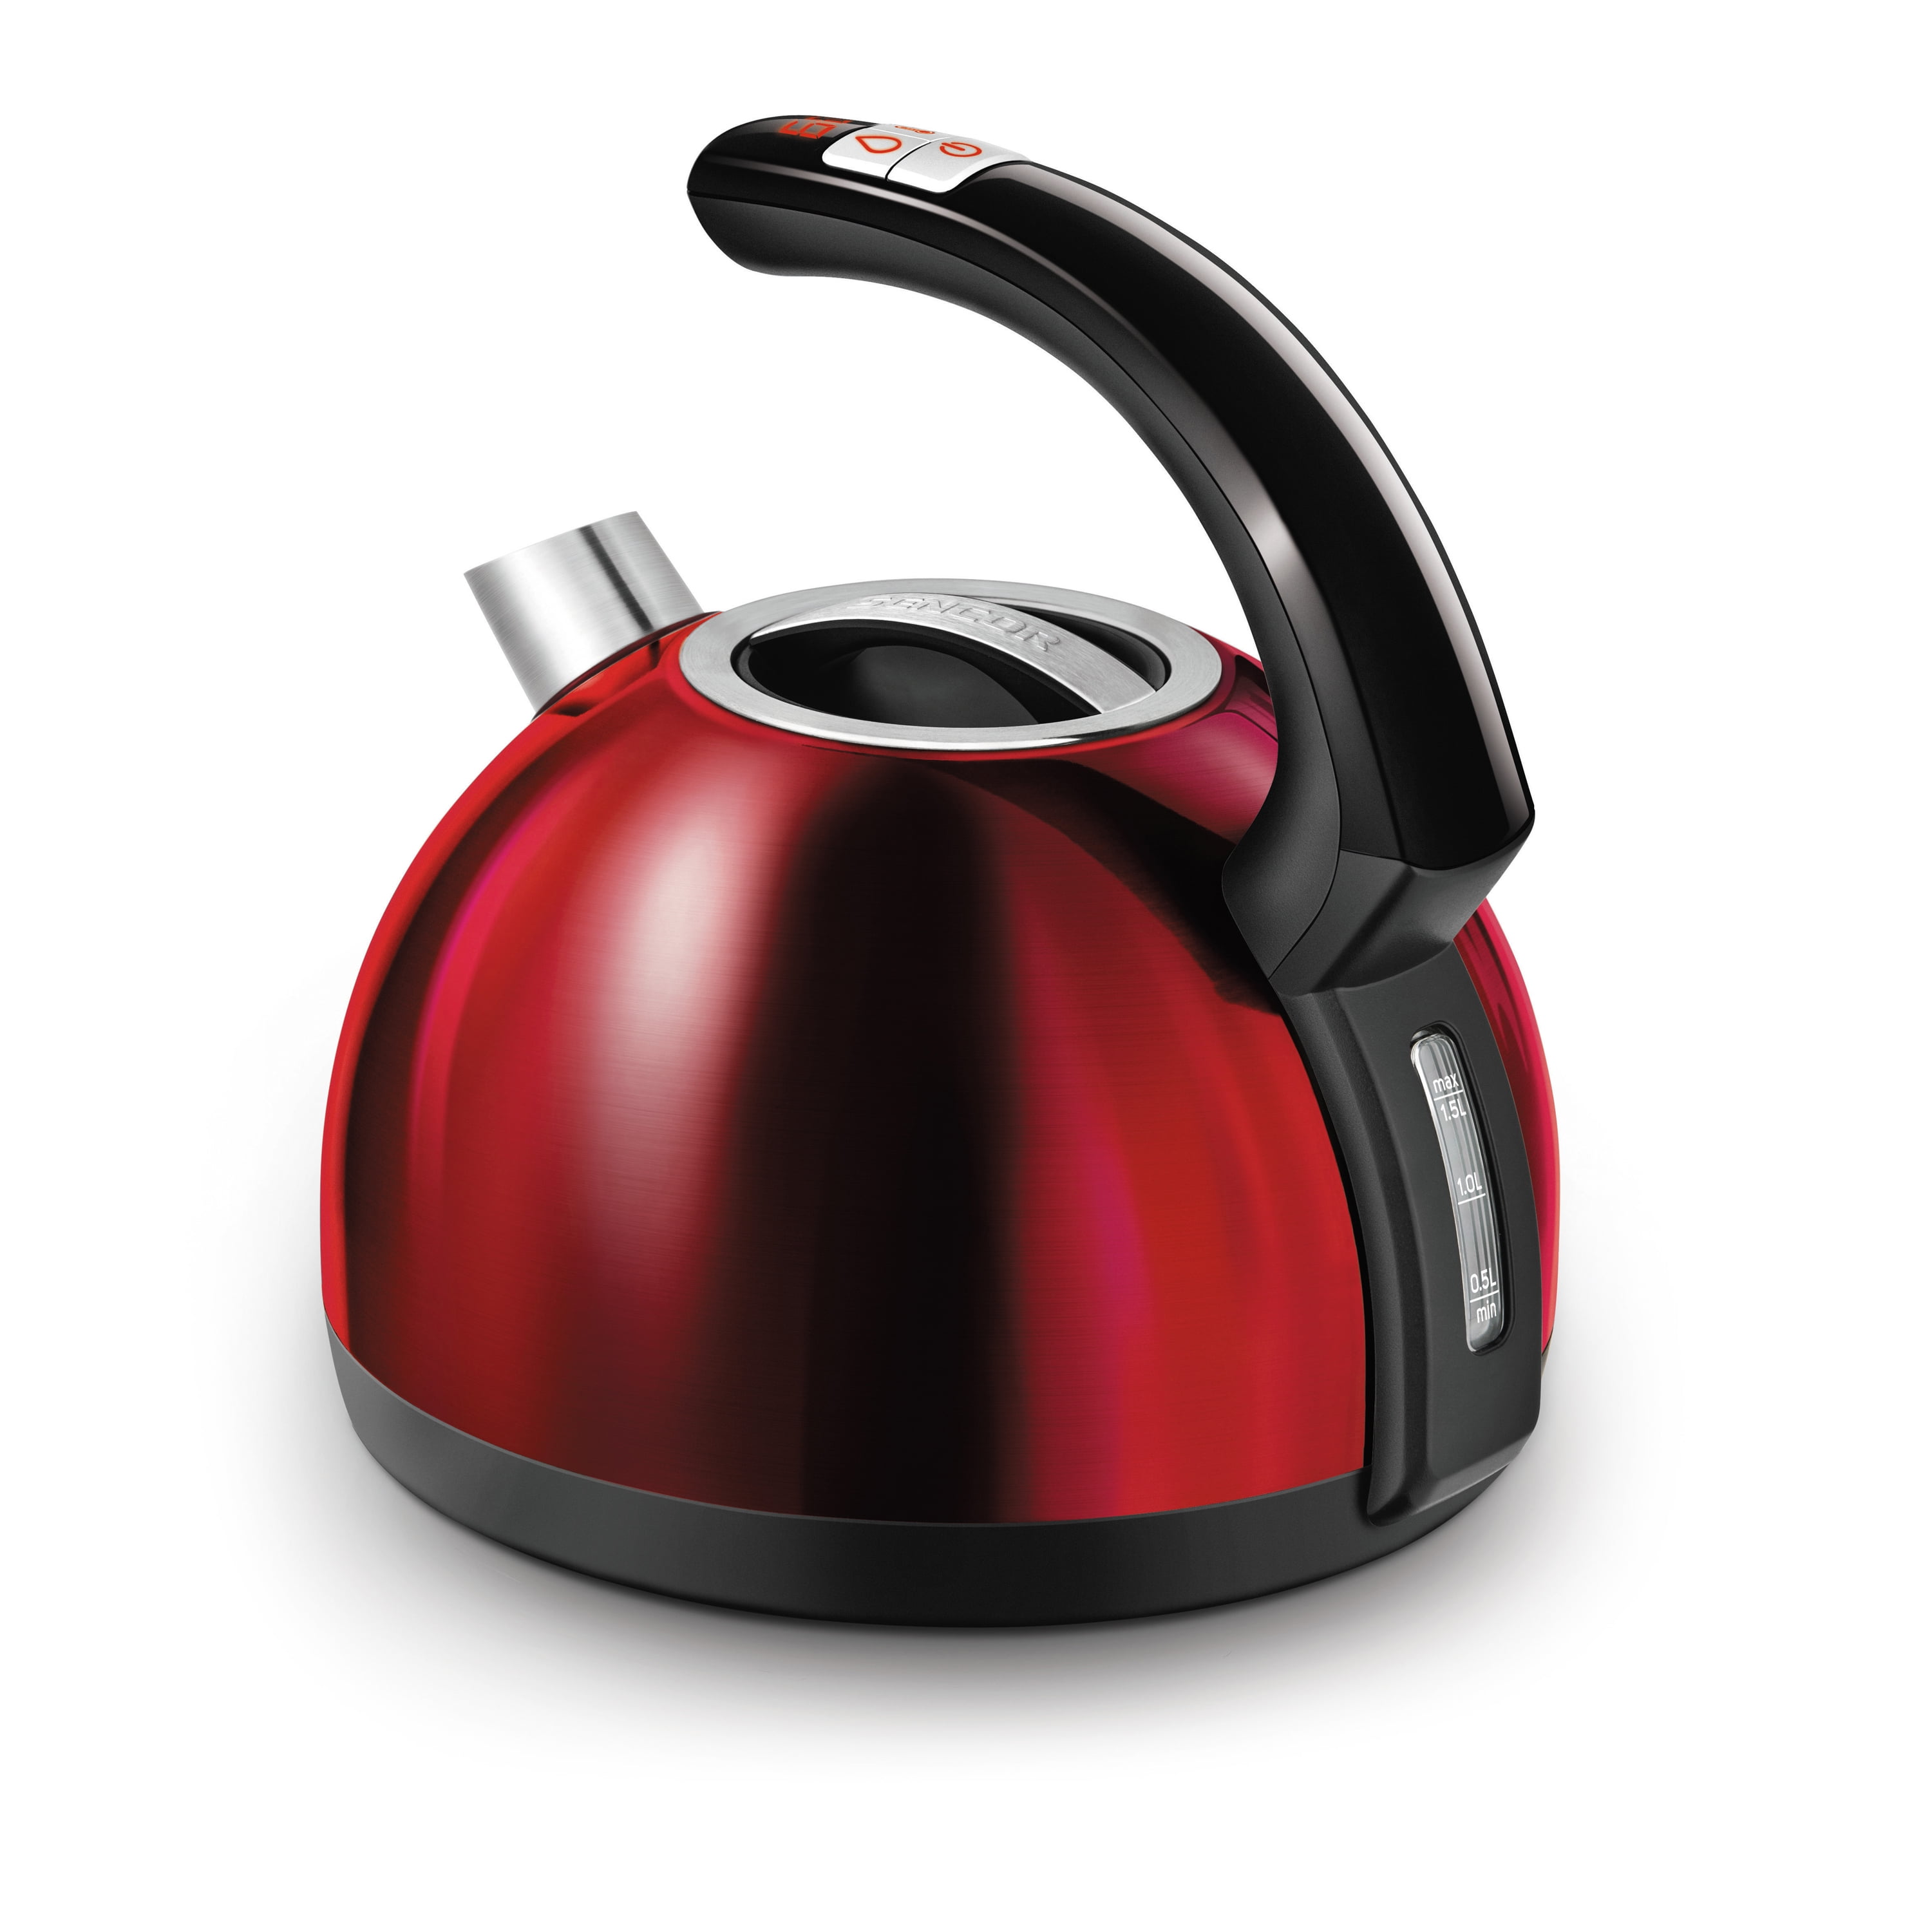 Sencor SWK46YL Crystal Electric Kettle with Power Cord Base, Sunflower  Yellow 